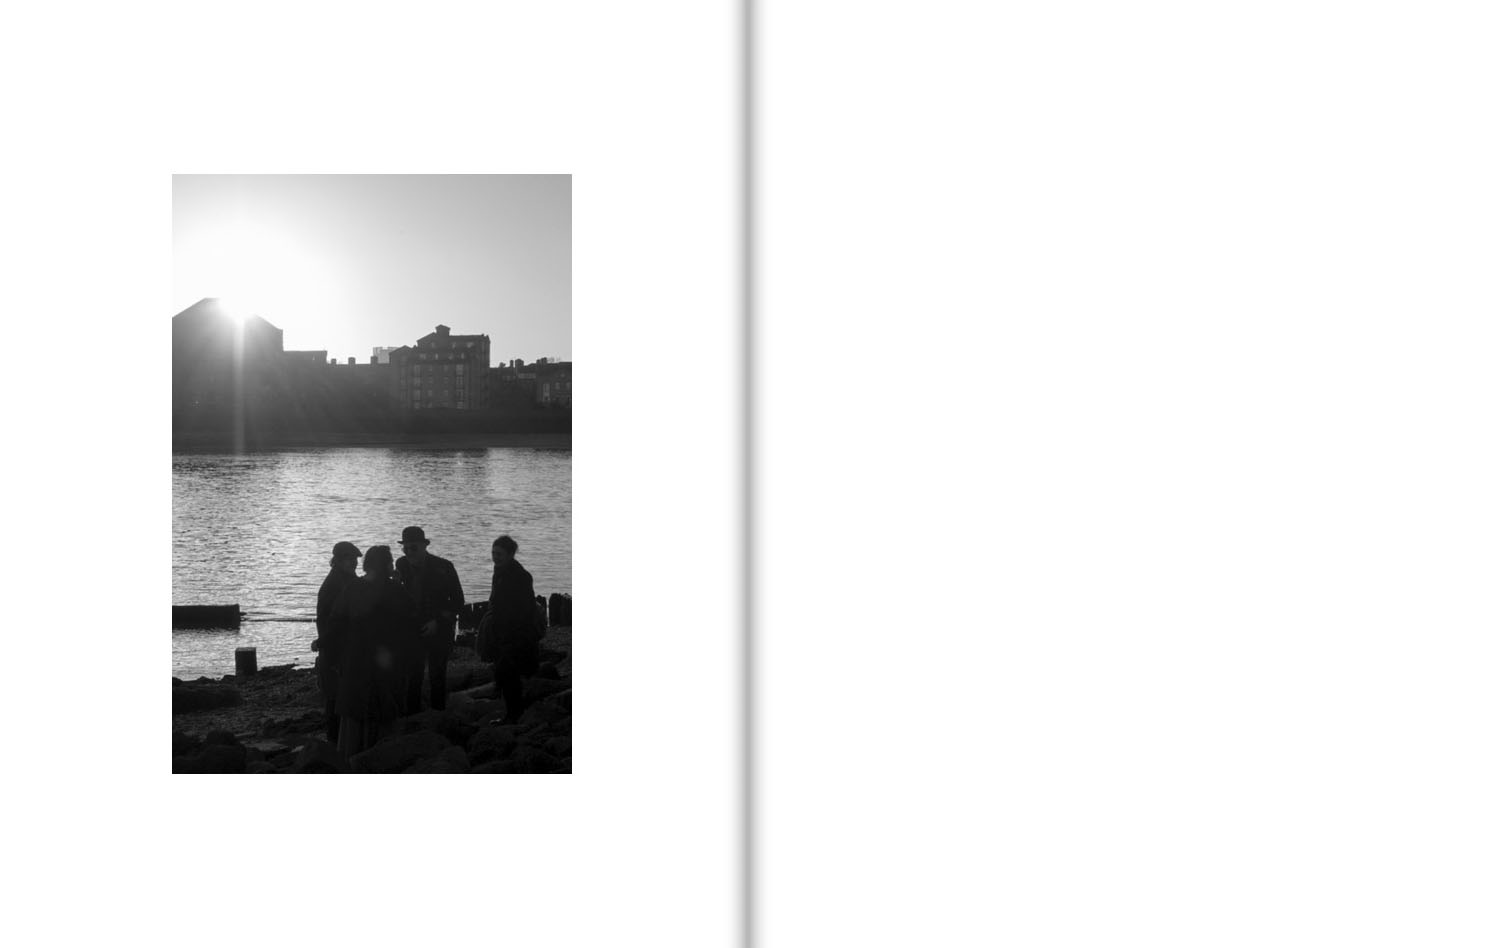 Four people stand by a river silhouetted by a sun that is rising (or setting) behind buildings on the opposite bank.
